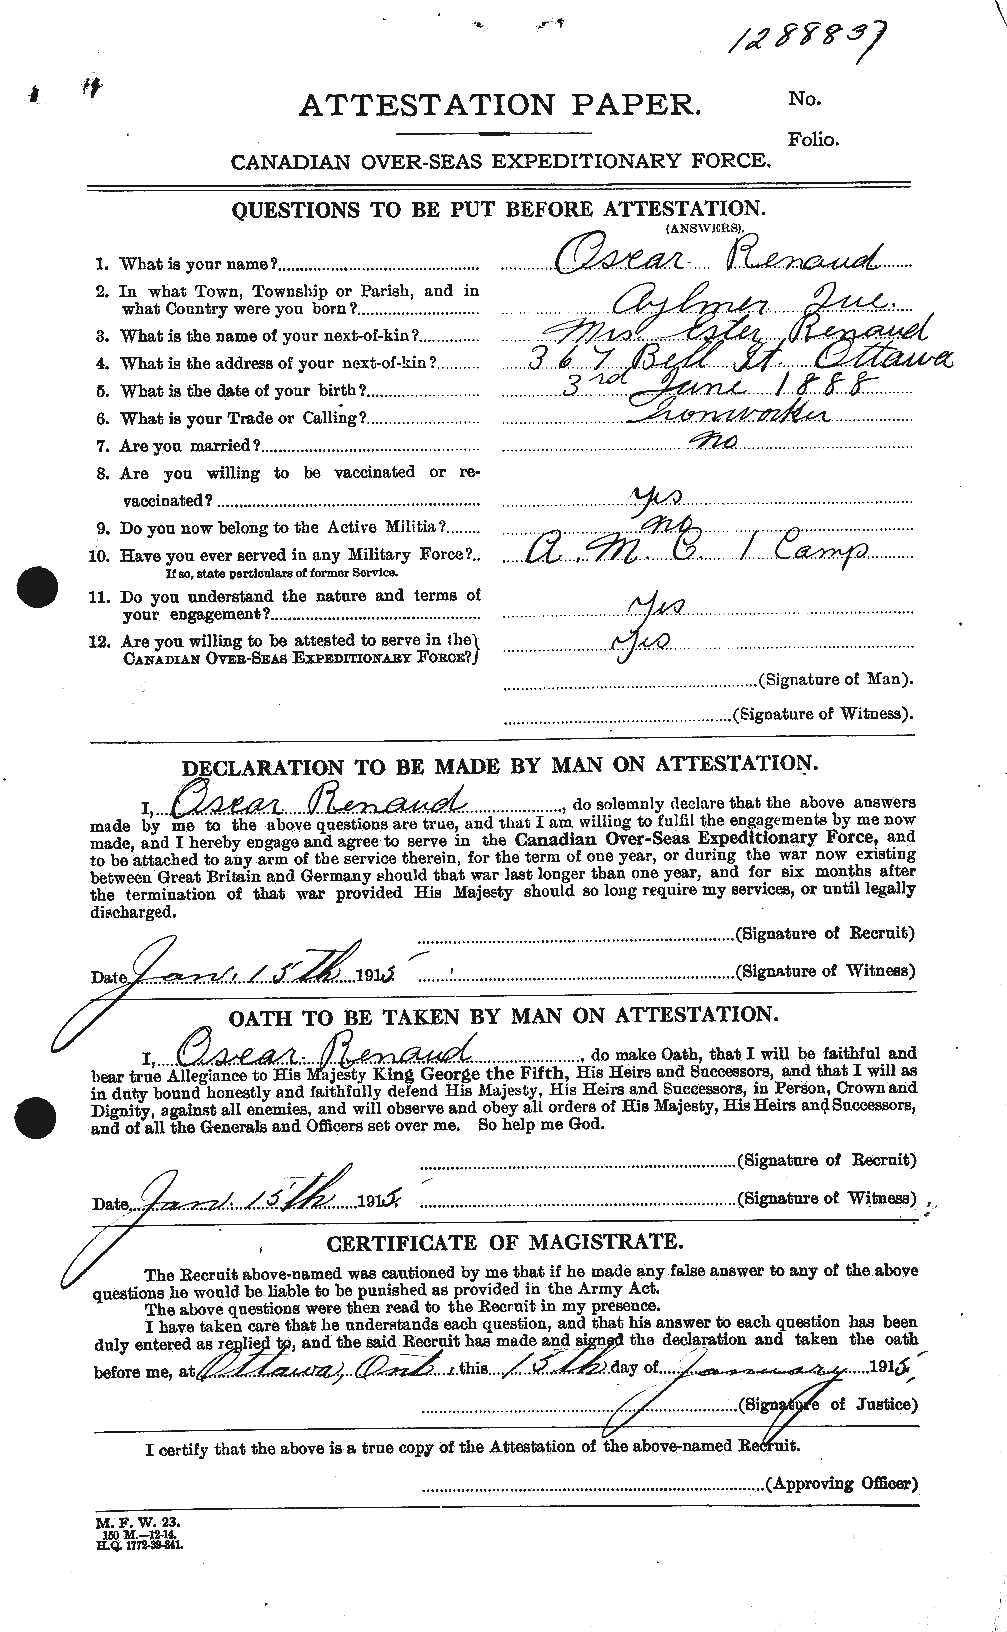 Personnel Records of the First World War - CEF 599713a